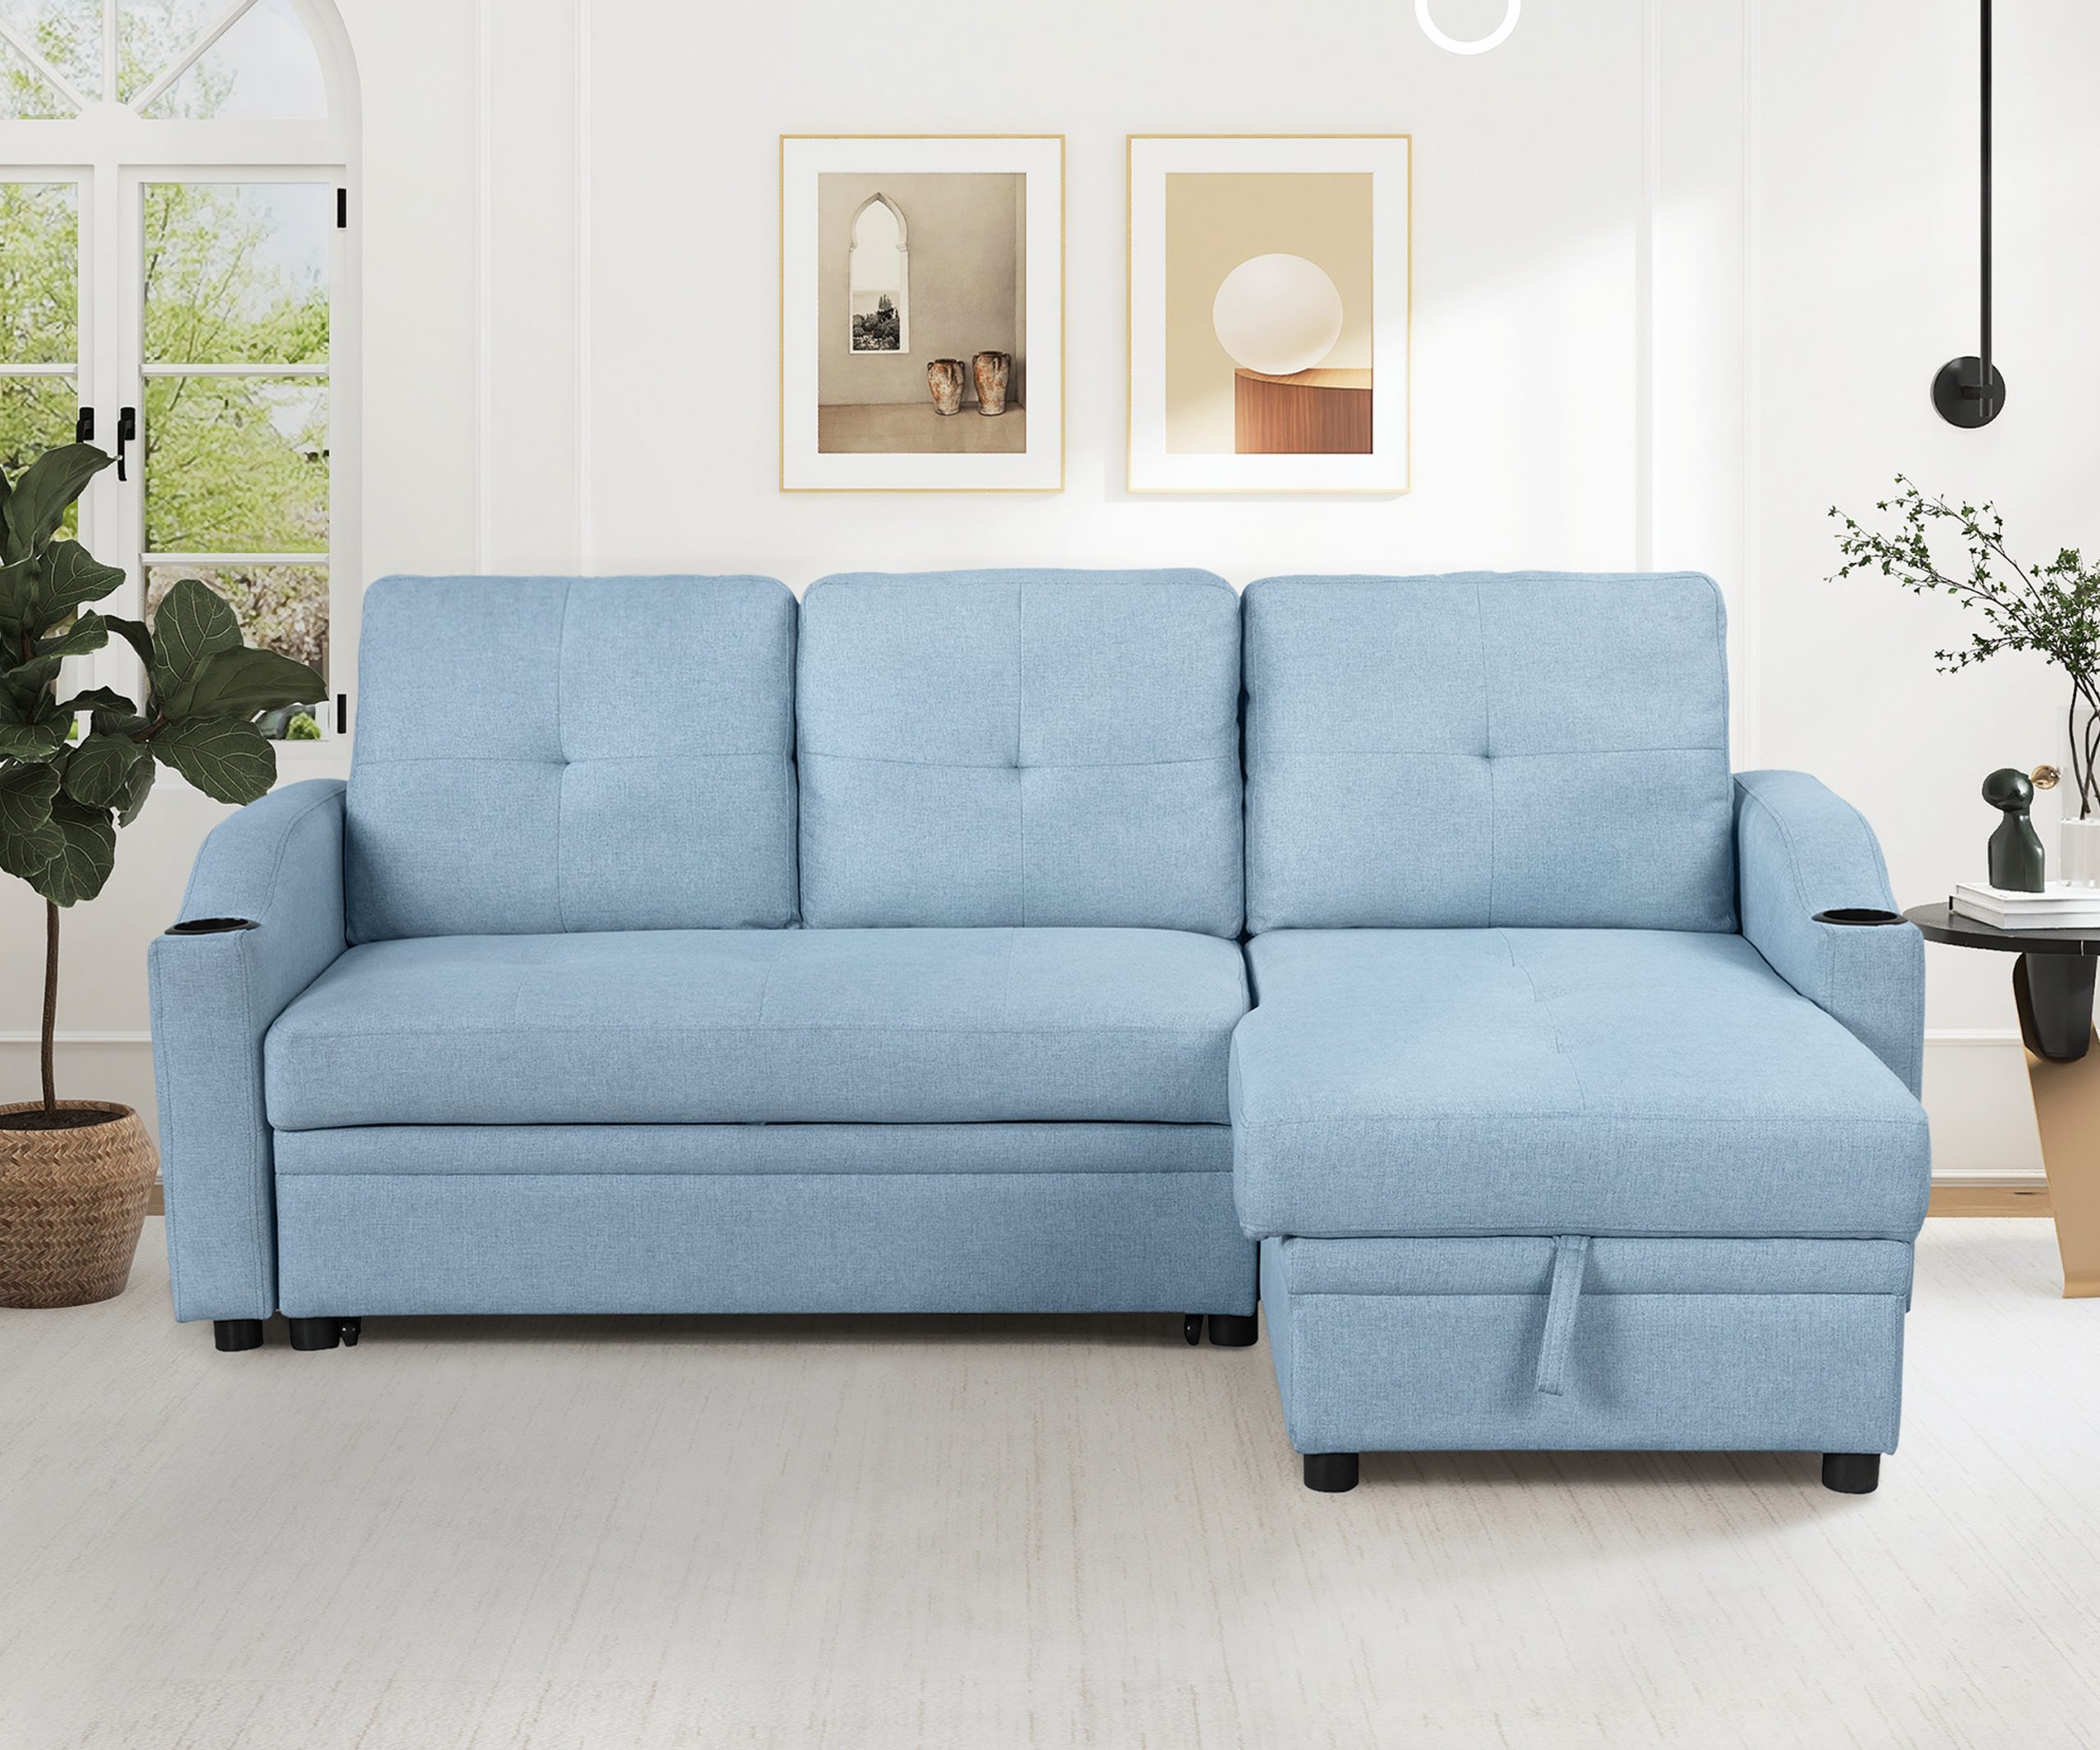 Modern Padded Upholstered Pull-Out Sofa Bed - SG000540AAC